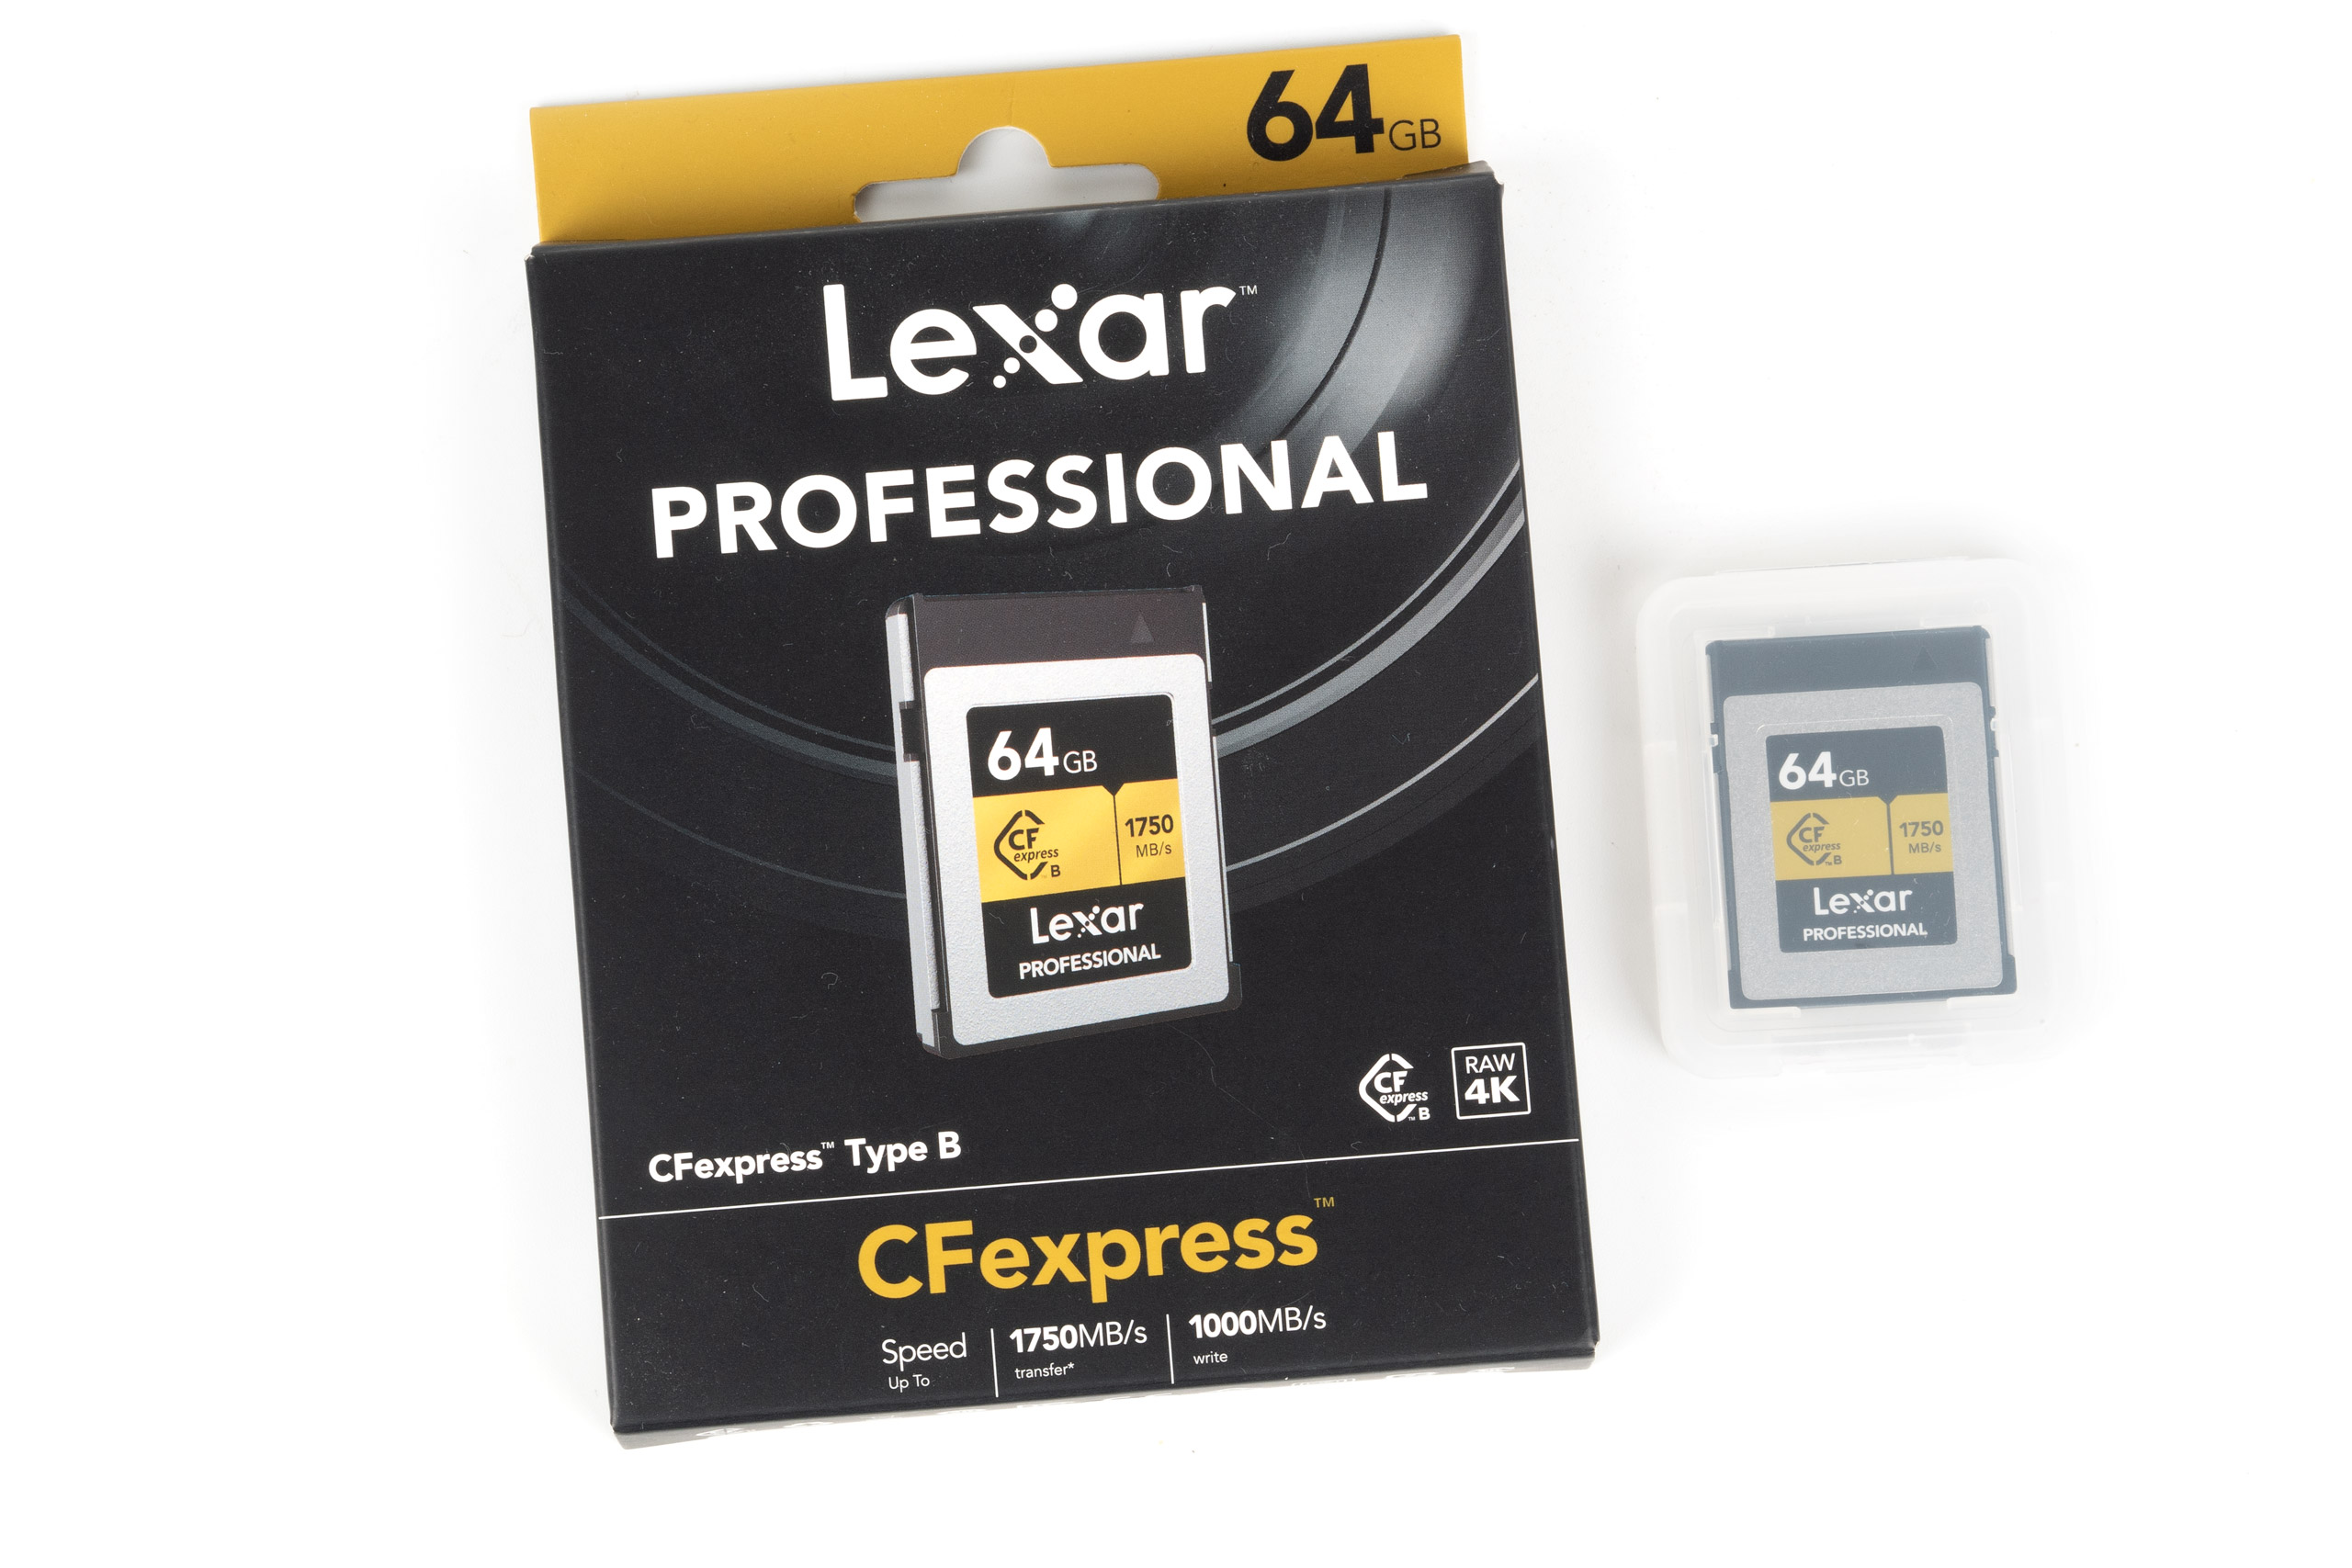 Lexar Professional Type B CFexpress (1750MB/s) card review